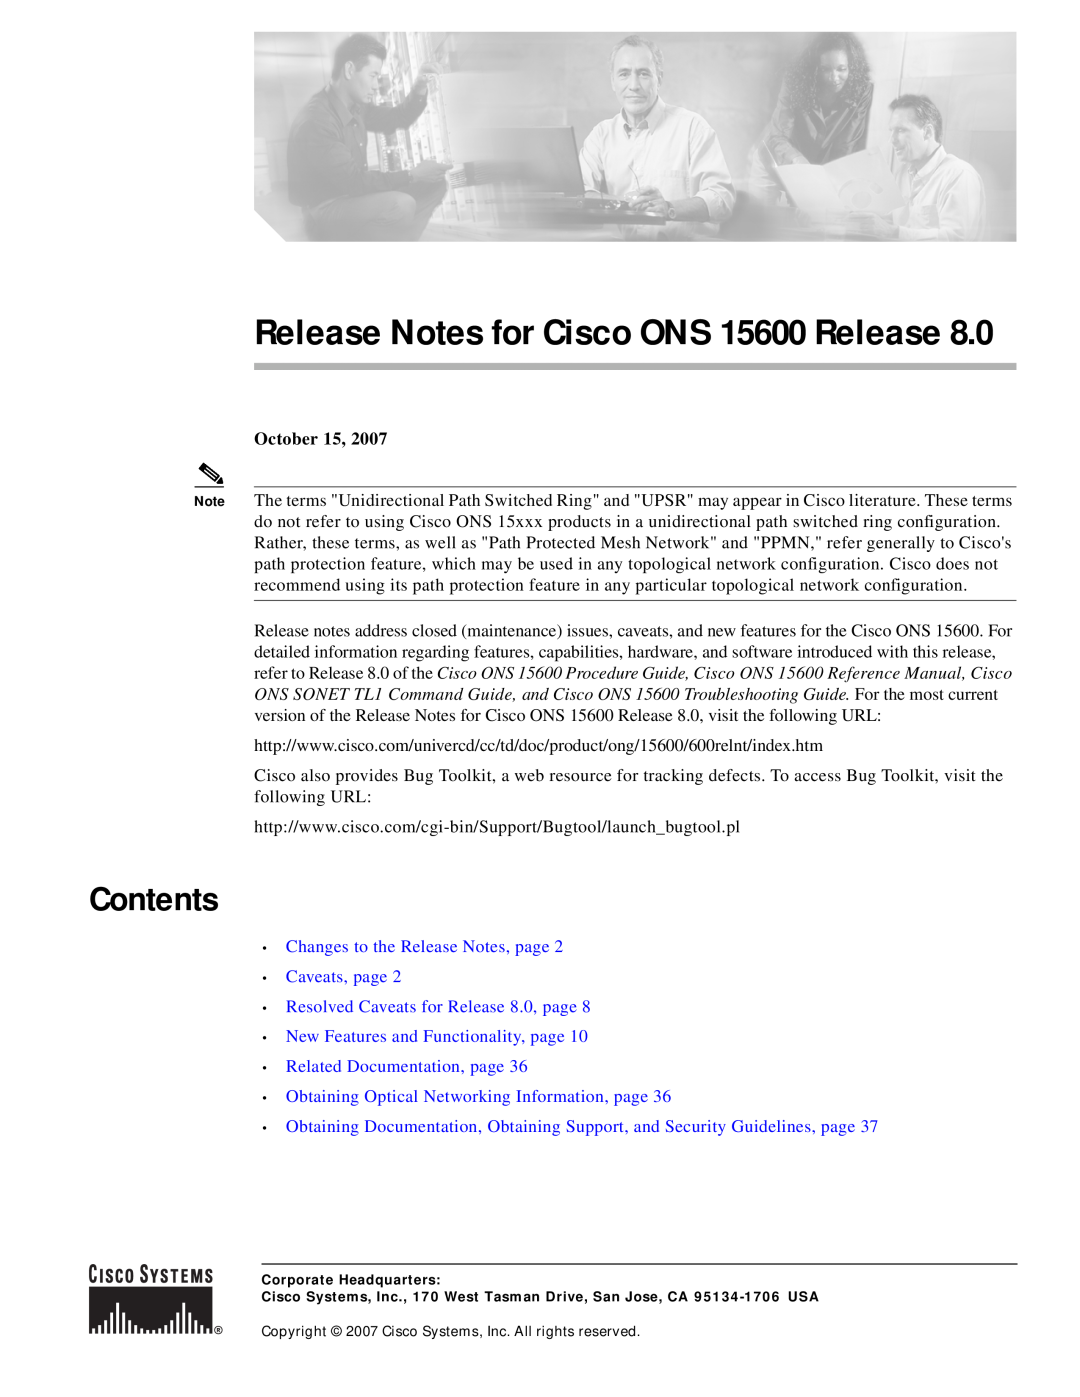 Cisco Systems manual Contents, October 15, Release Notes for Cisco ONS 15600 Release 